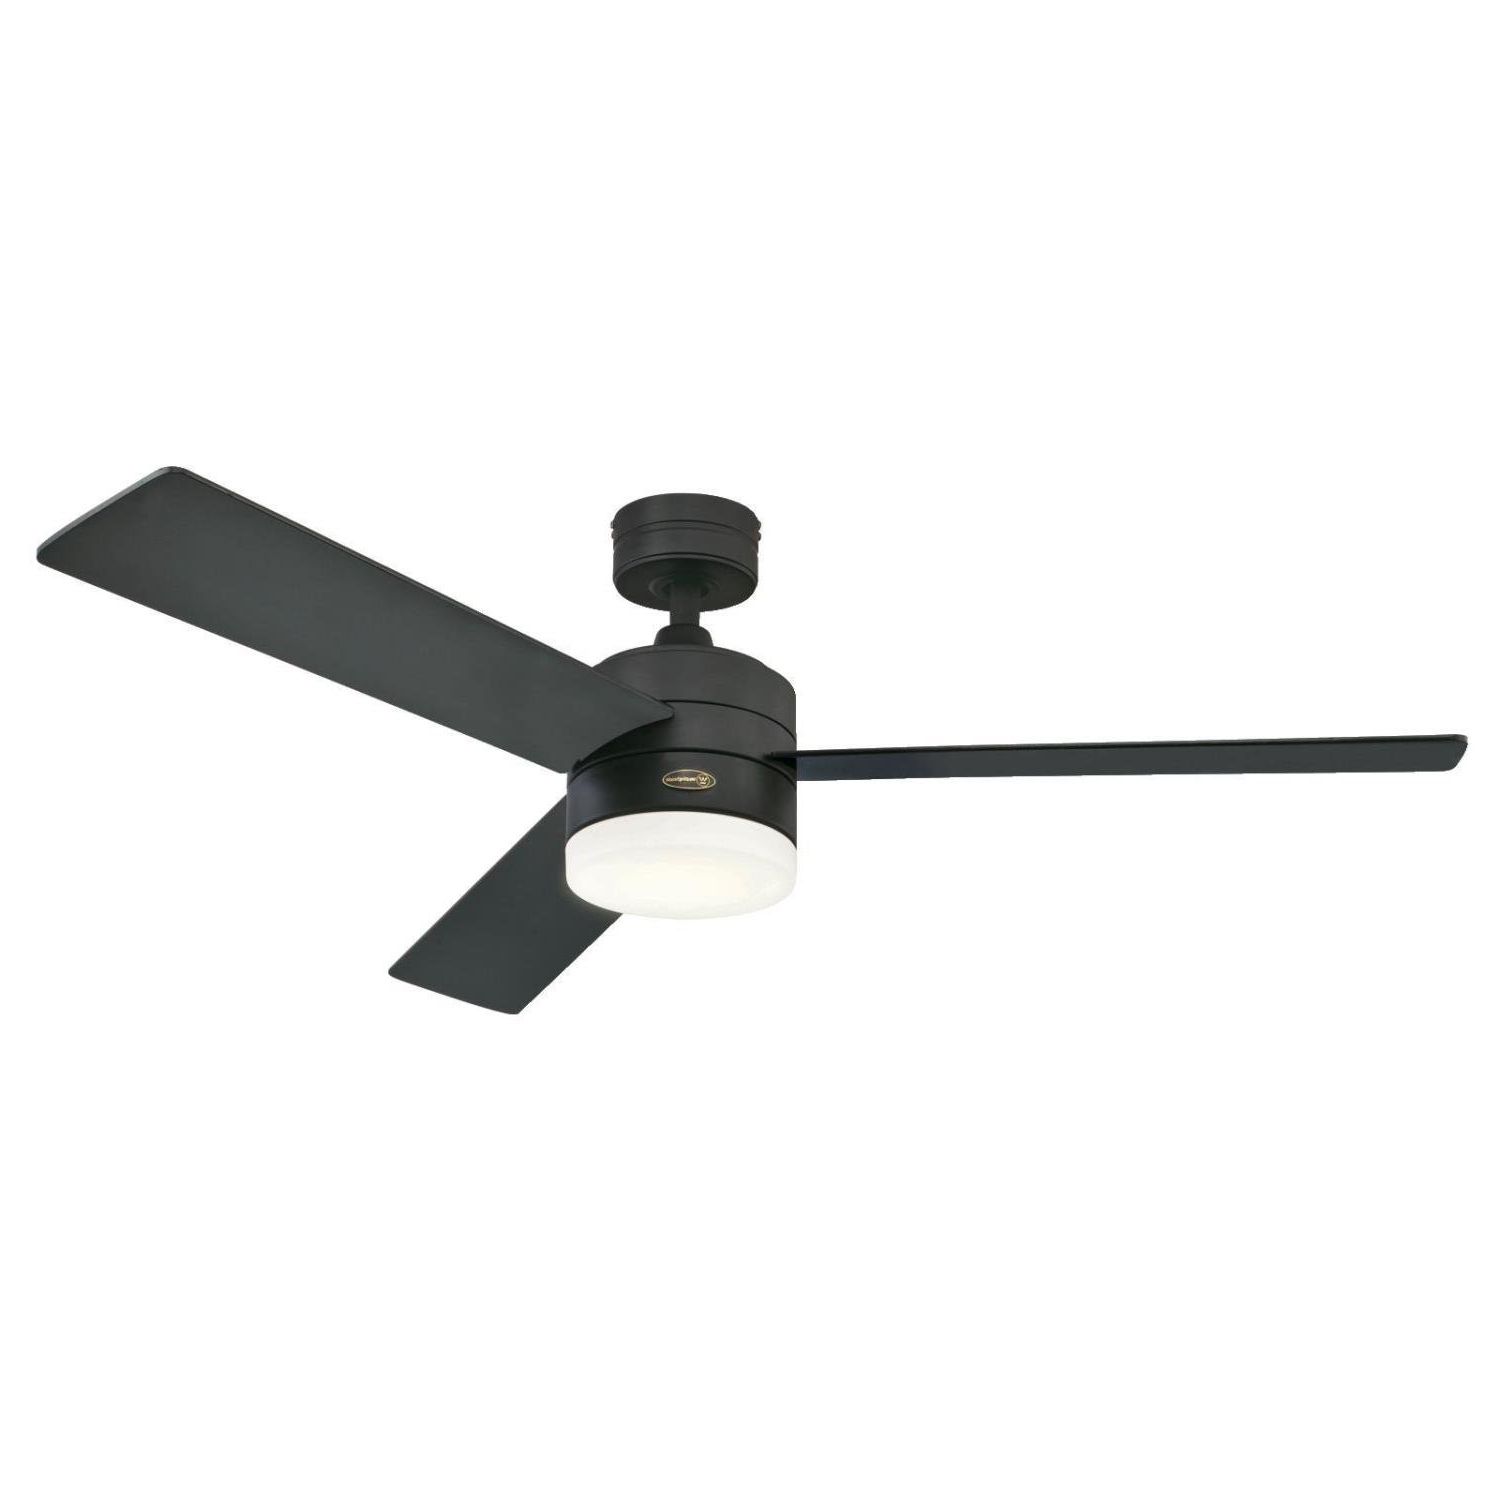 2020 52" Luray 3 Blade Ceiling Fan With Remote, Light Kit Included Intended For Windemere 5 Blade Ceiling Fans With Remote (Photo 9 of 20)